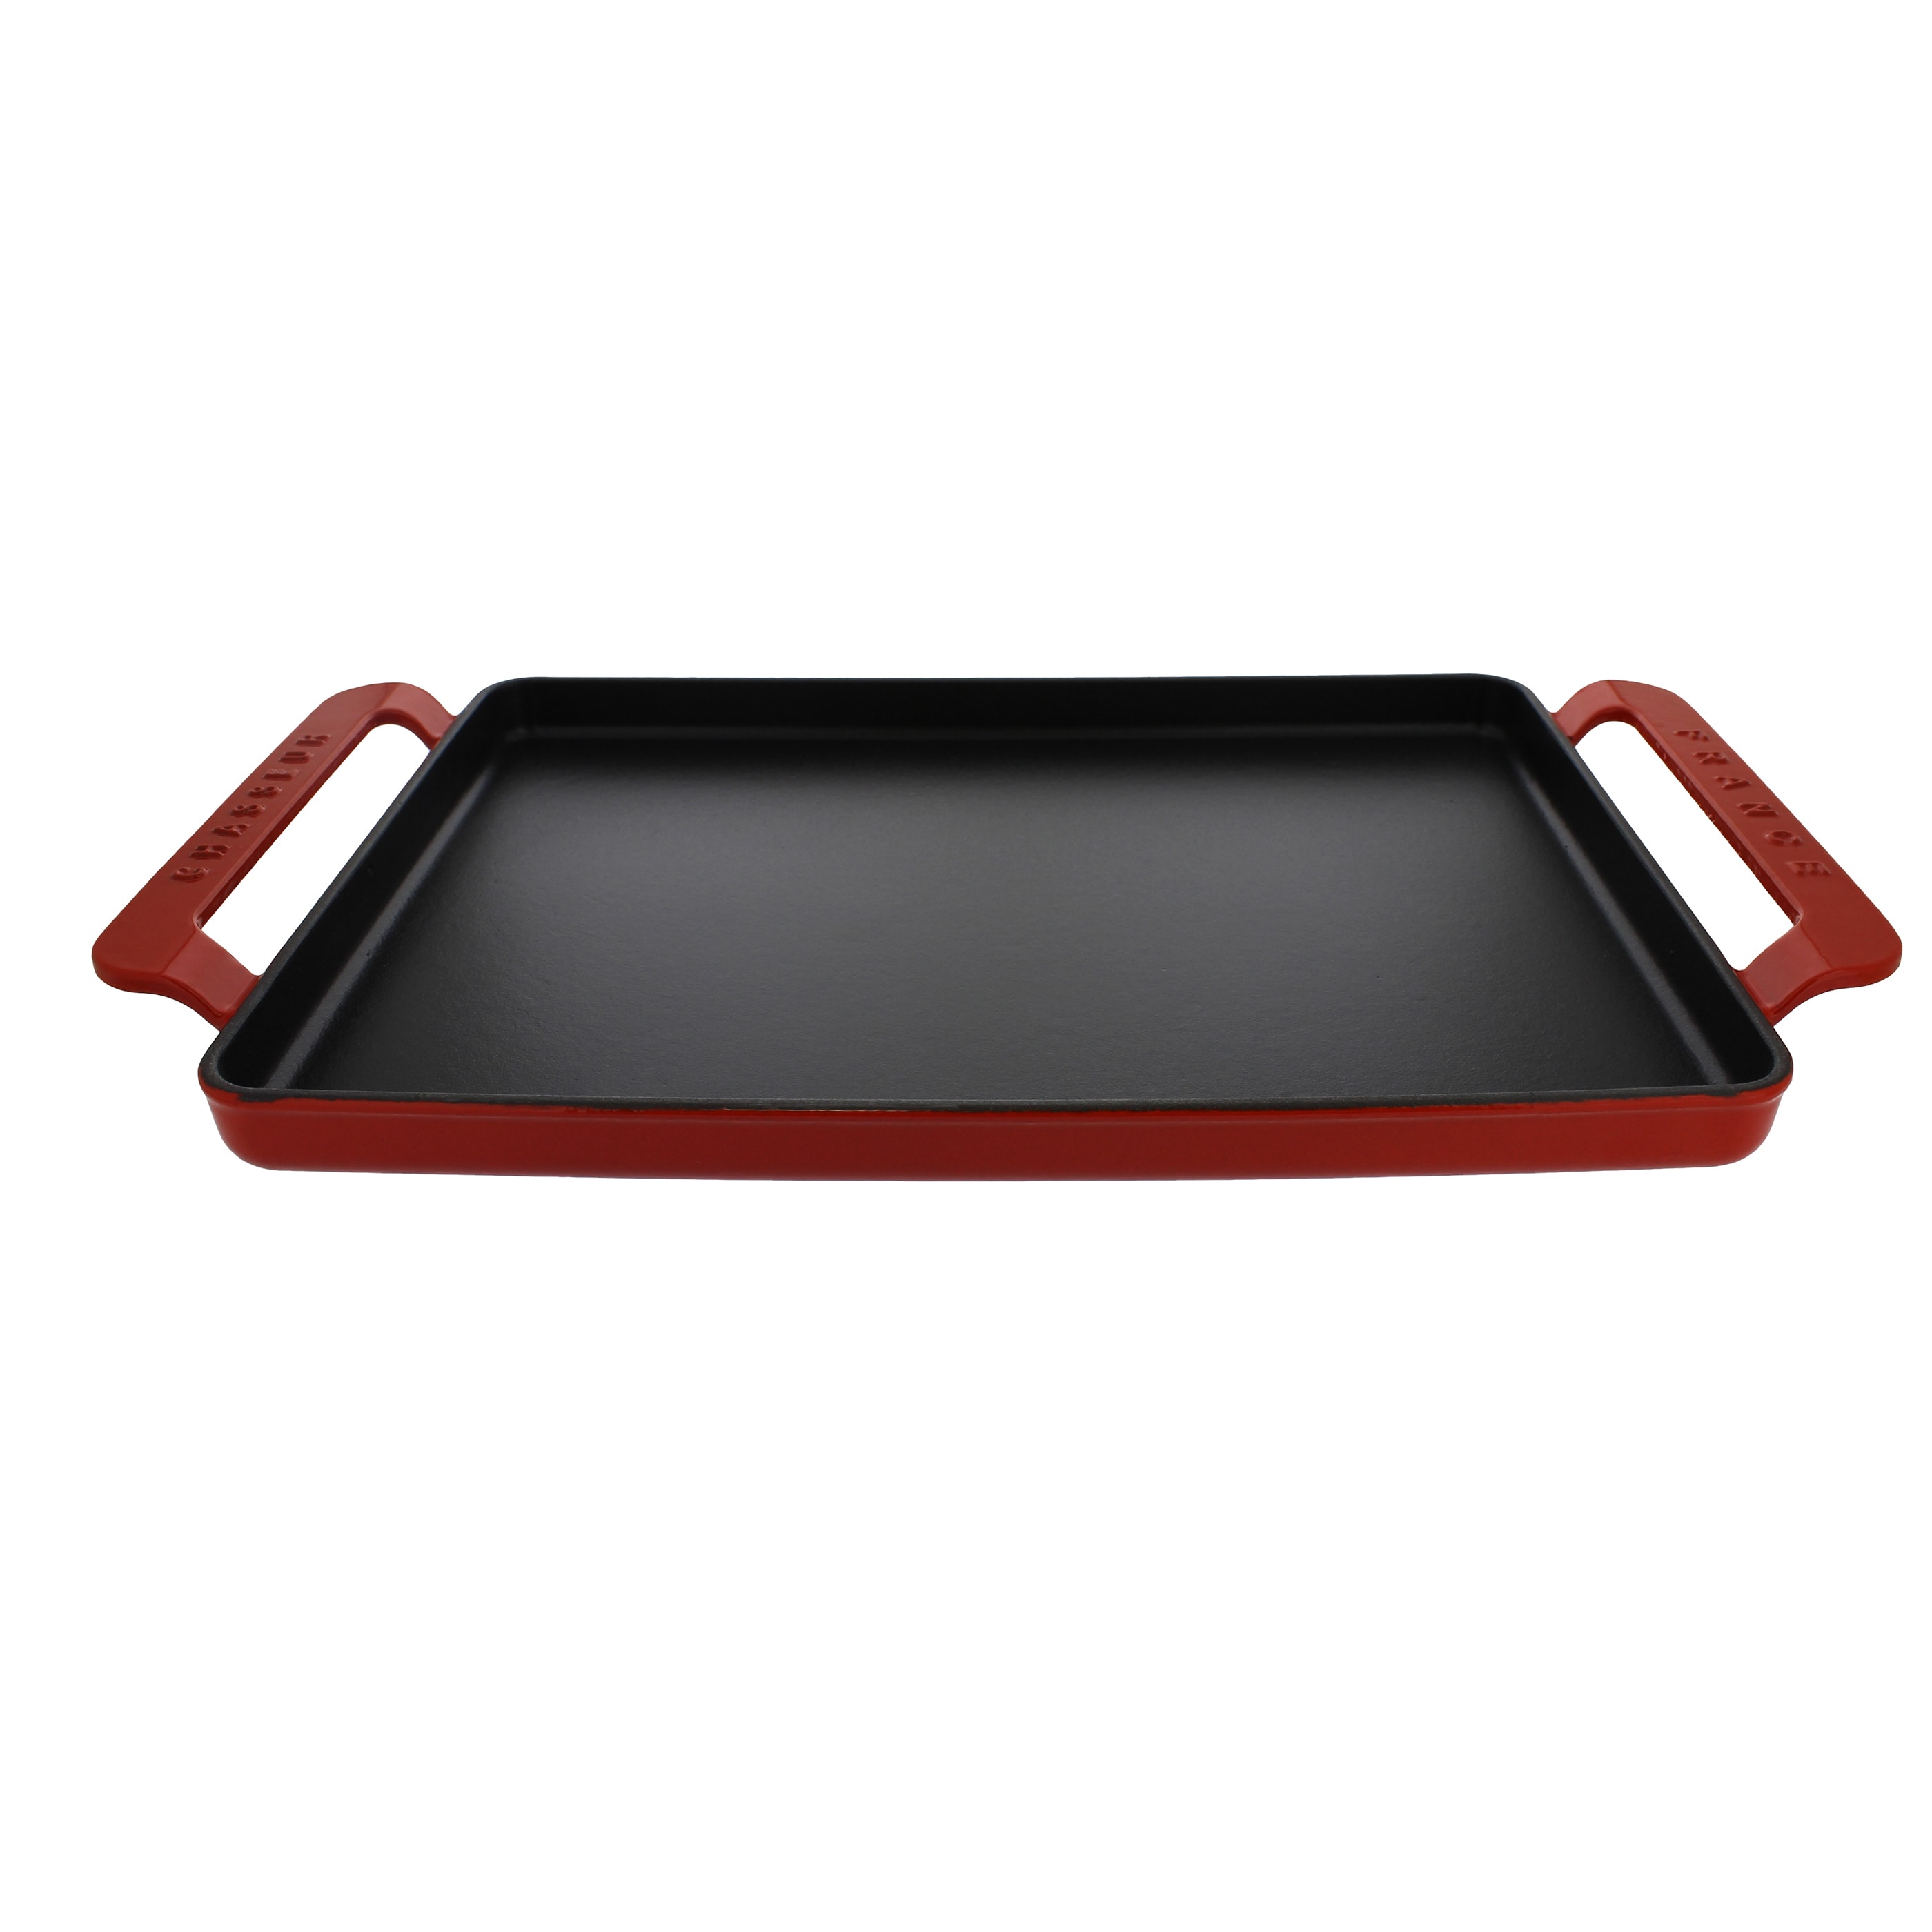 Chasseur 12-inch Red Rectangular French Enameled Cast Iron Grill